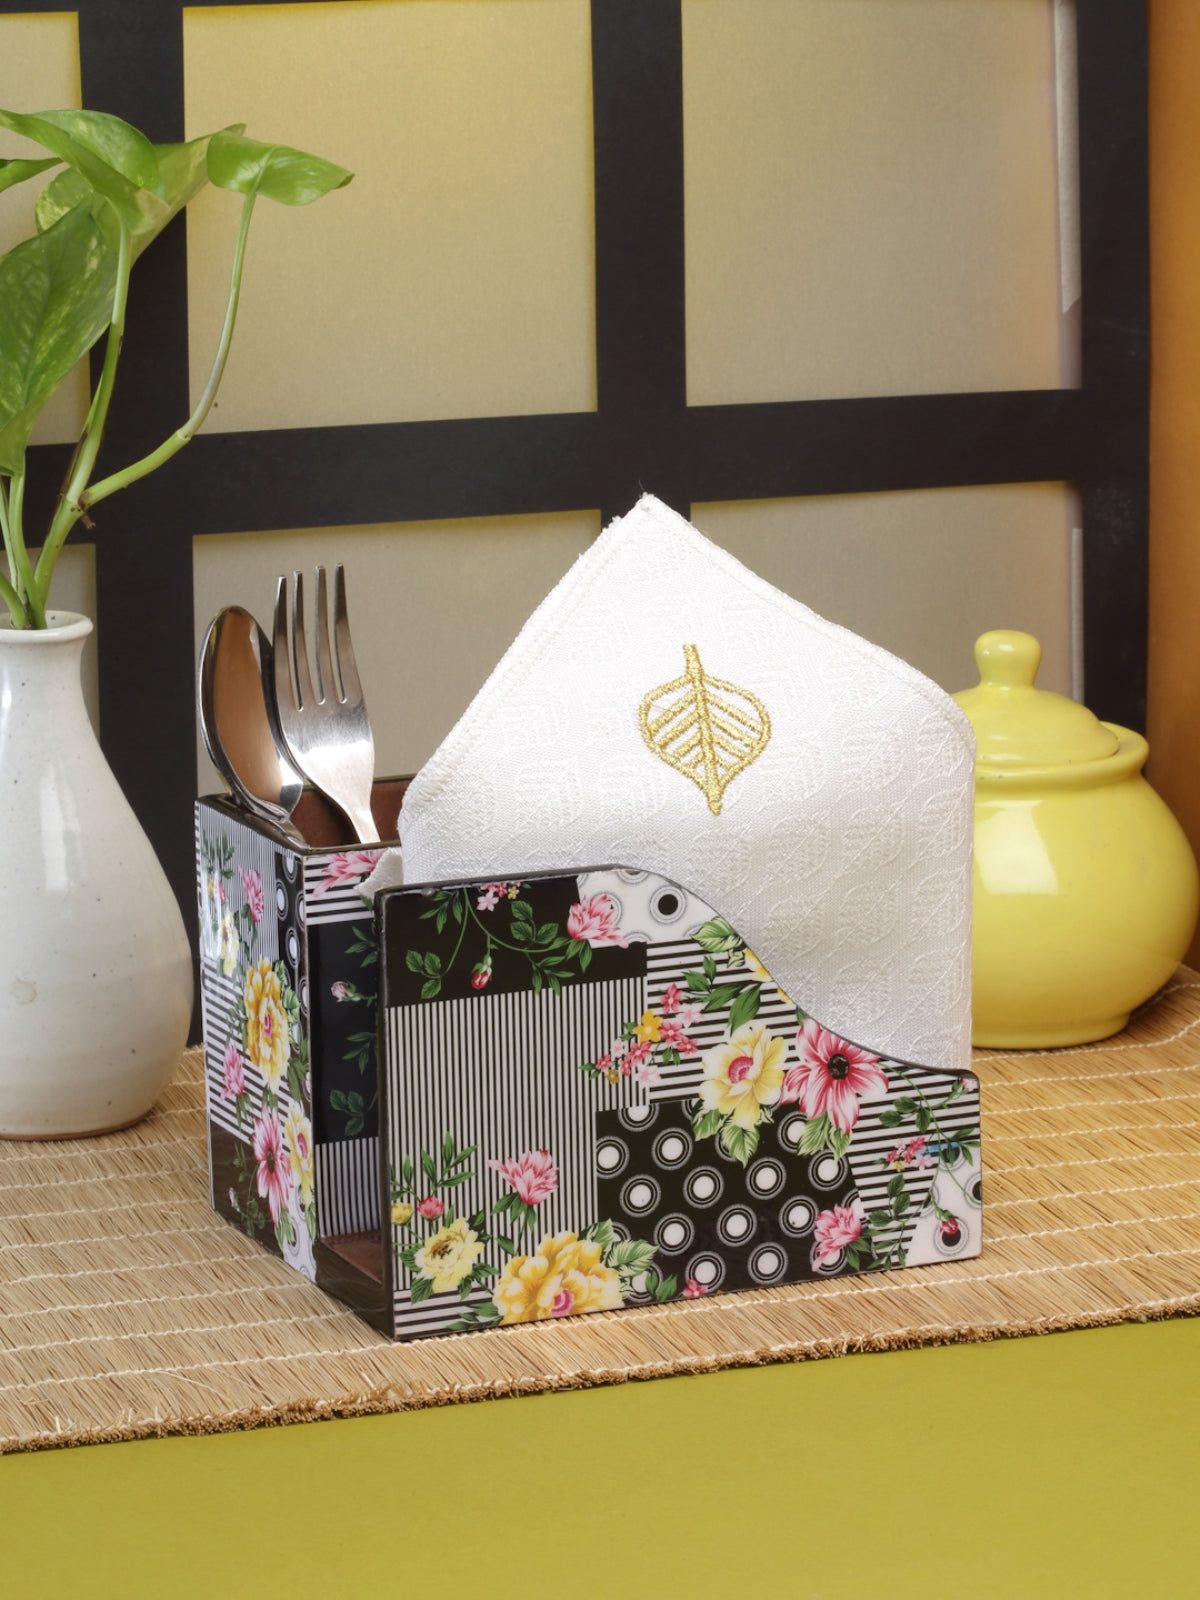 Green & White Floral Patterned Tissue & Cutlery Holder